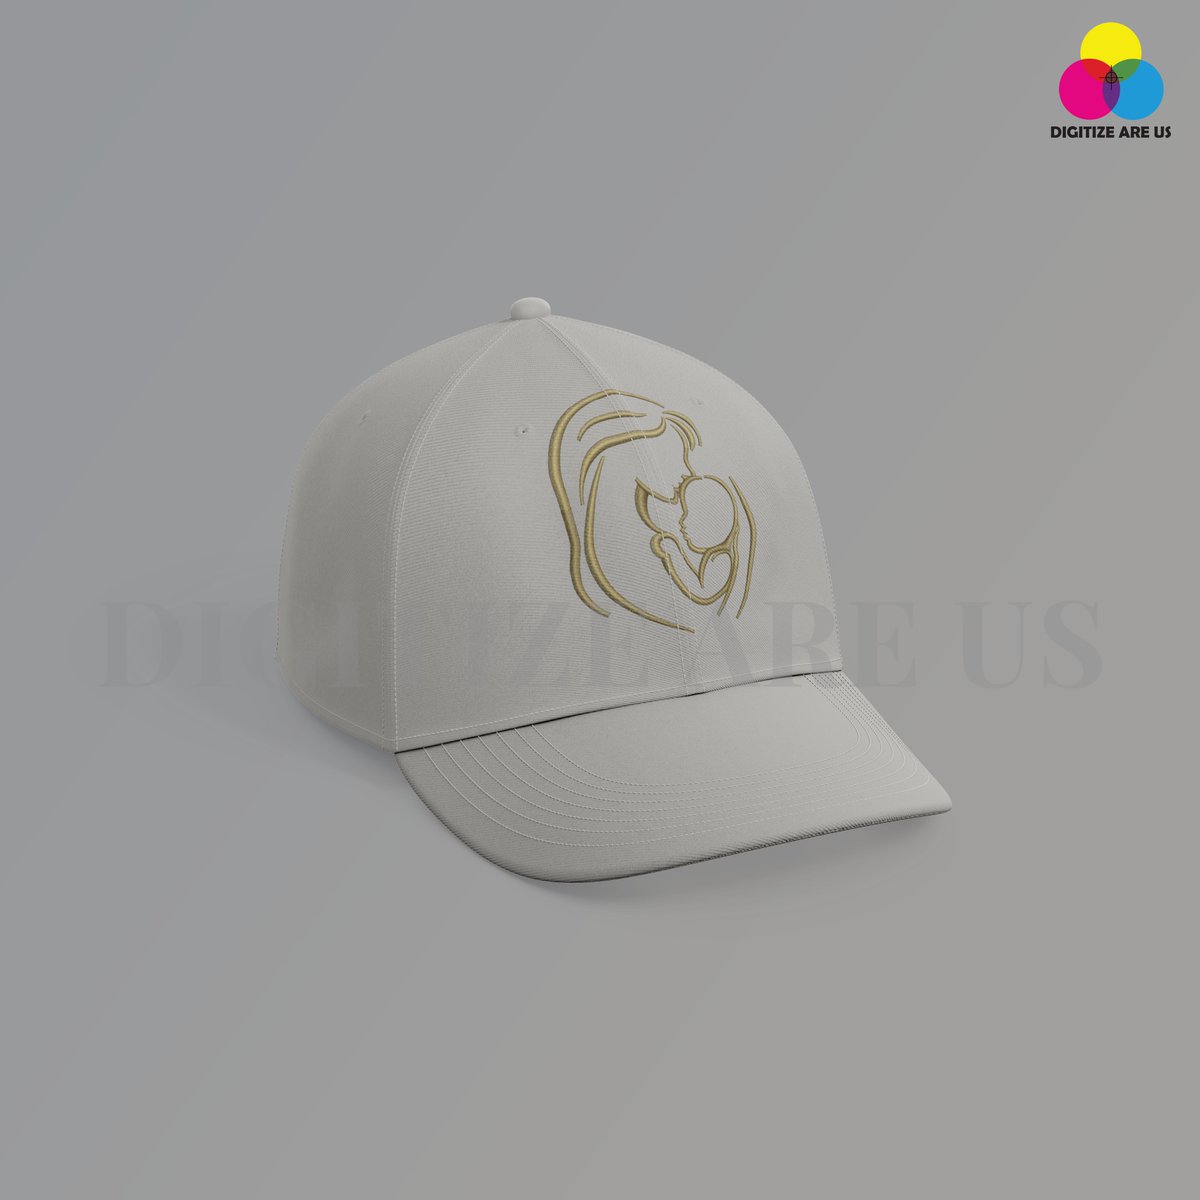 Get a mother's day special cap digitized by Us and share the love!

Services of Digitize Are Us is always under budget!

#style #clothing #custom #custommade #clothingbrand #apparel #shirts #hoodies #tshirtdesign #hats #clothingline #screenprinting #thriftedfashion #customdesign